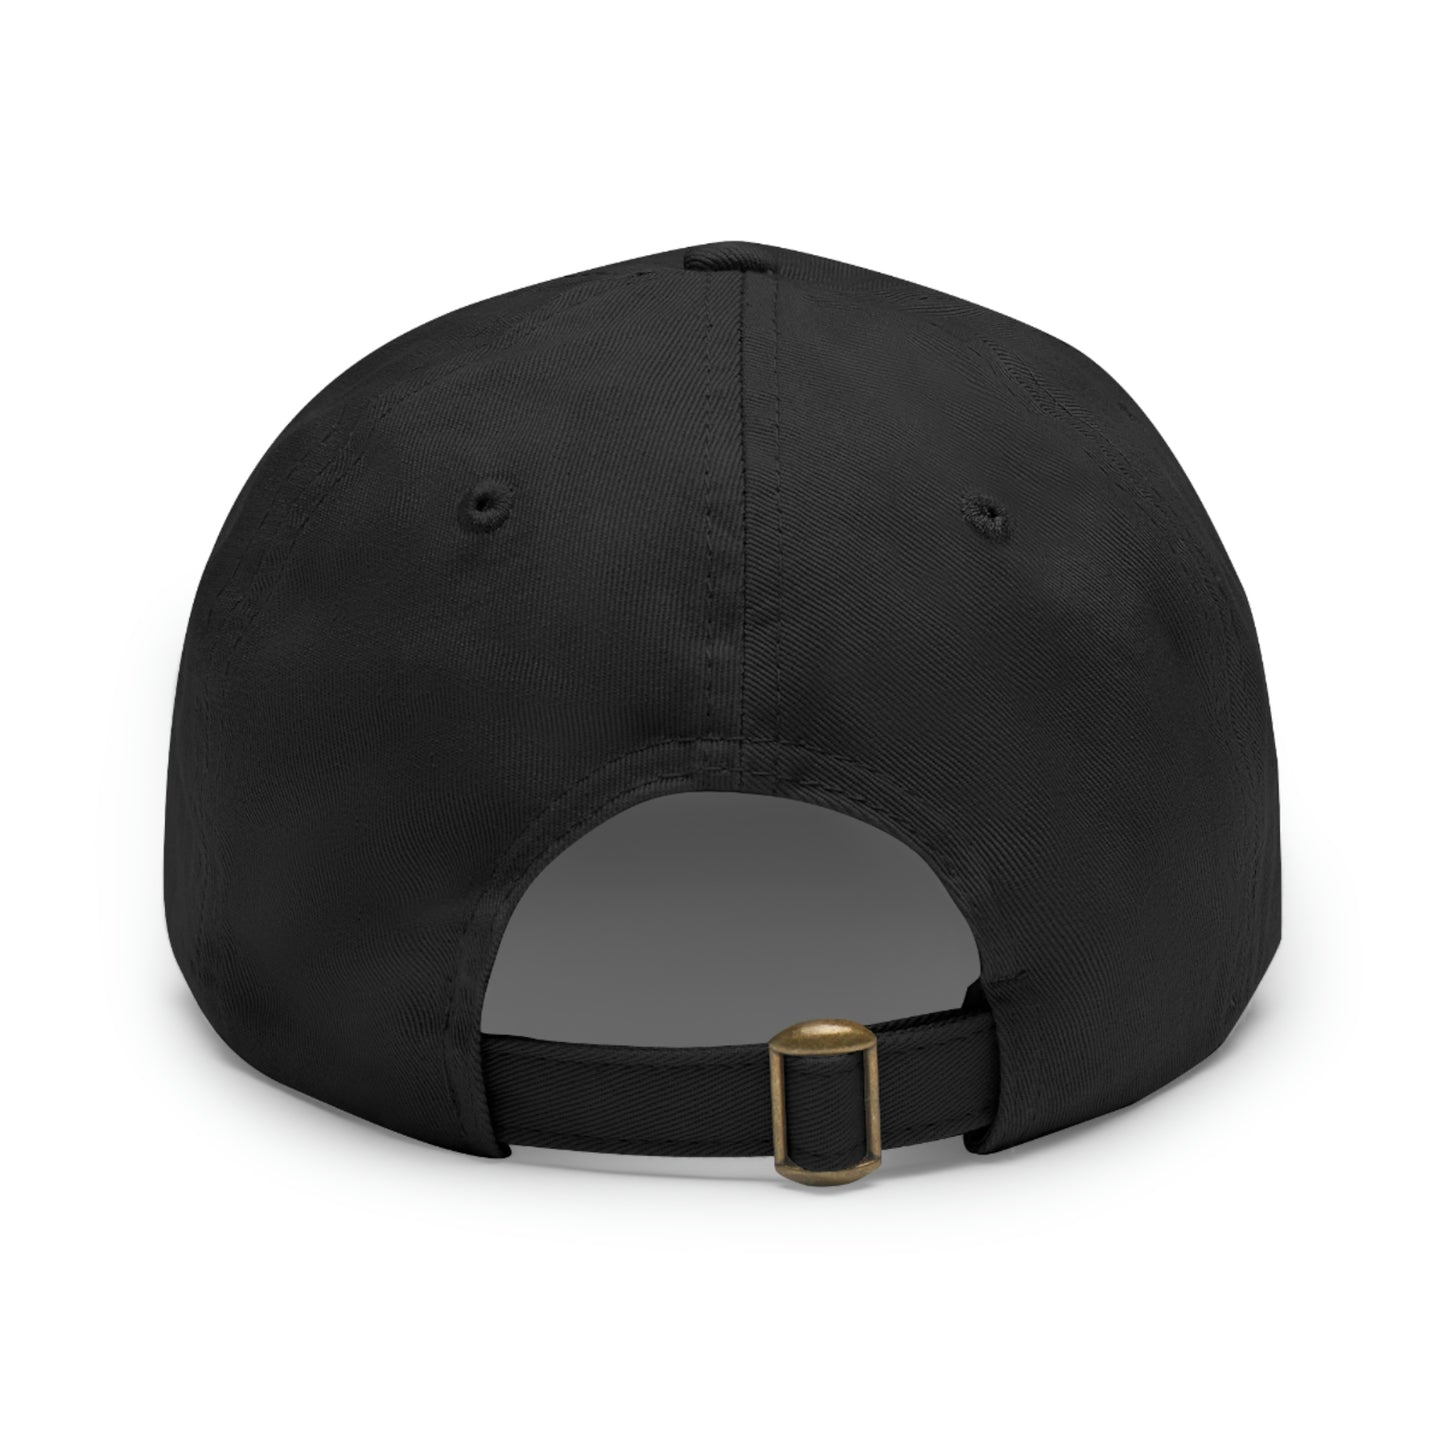 Hat with Leather Patch (Round) - Amateur AF